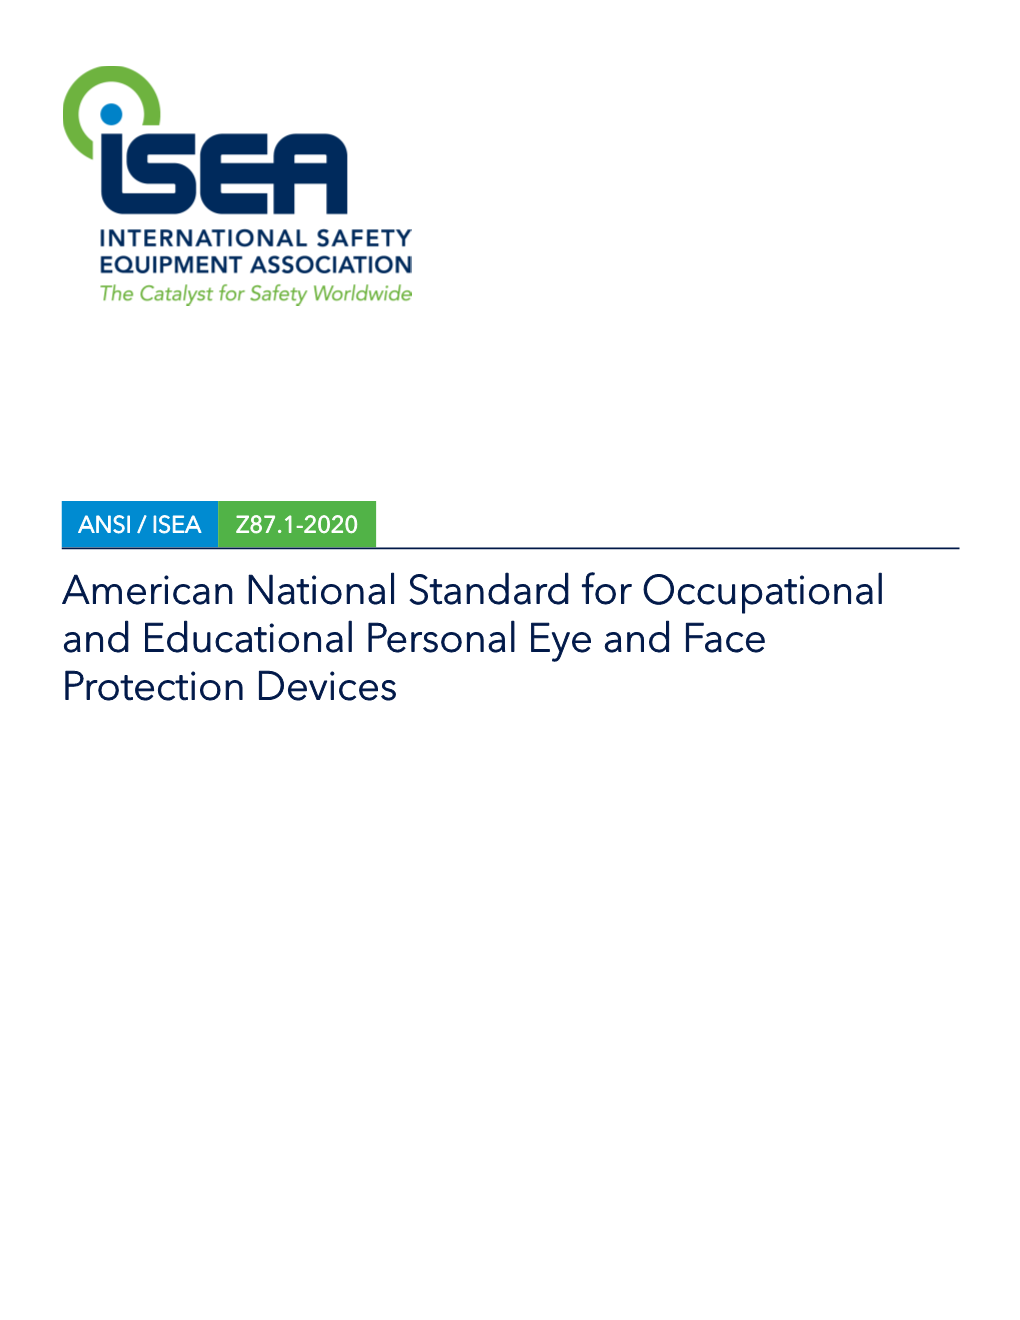 American National Standard for Occupational and Educational Personal Eye and Face Protection Devices ANSI/ISEA Z87.1-2020 Revision of ANSI/ISEA Z87.1-2015